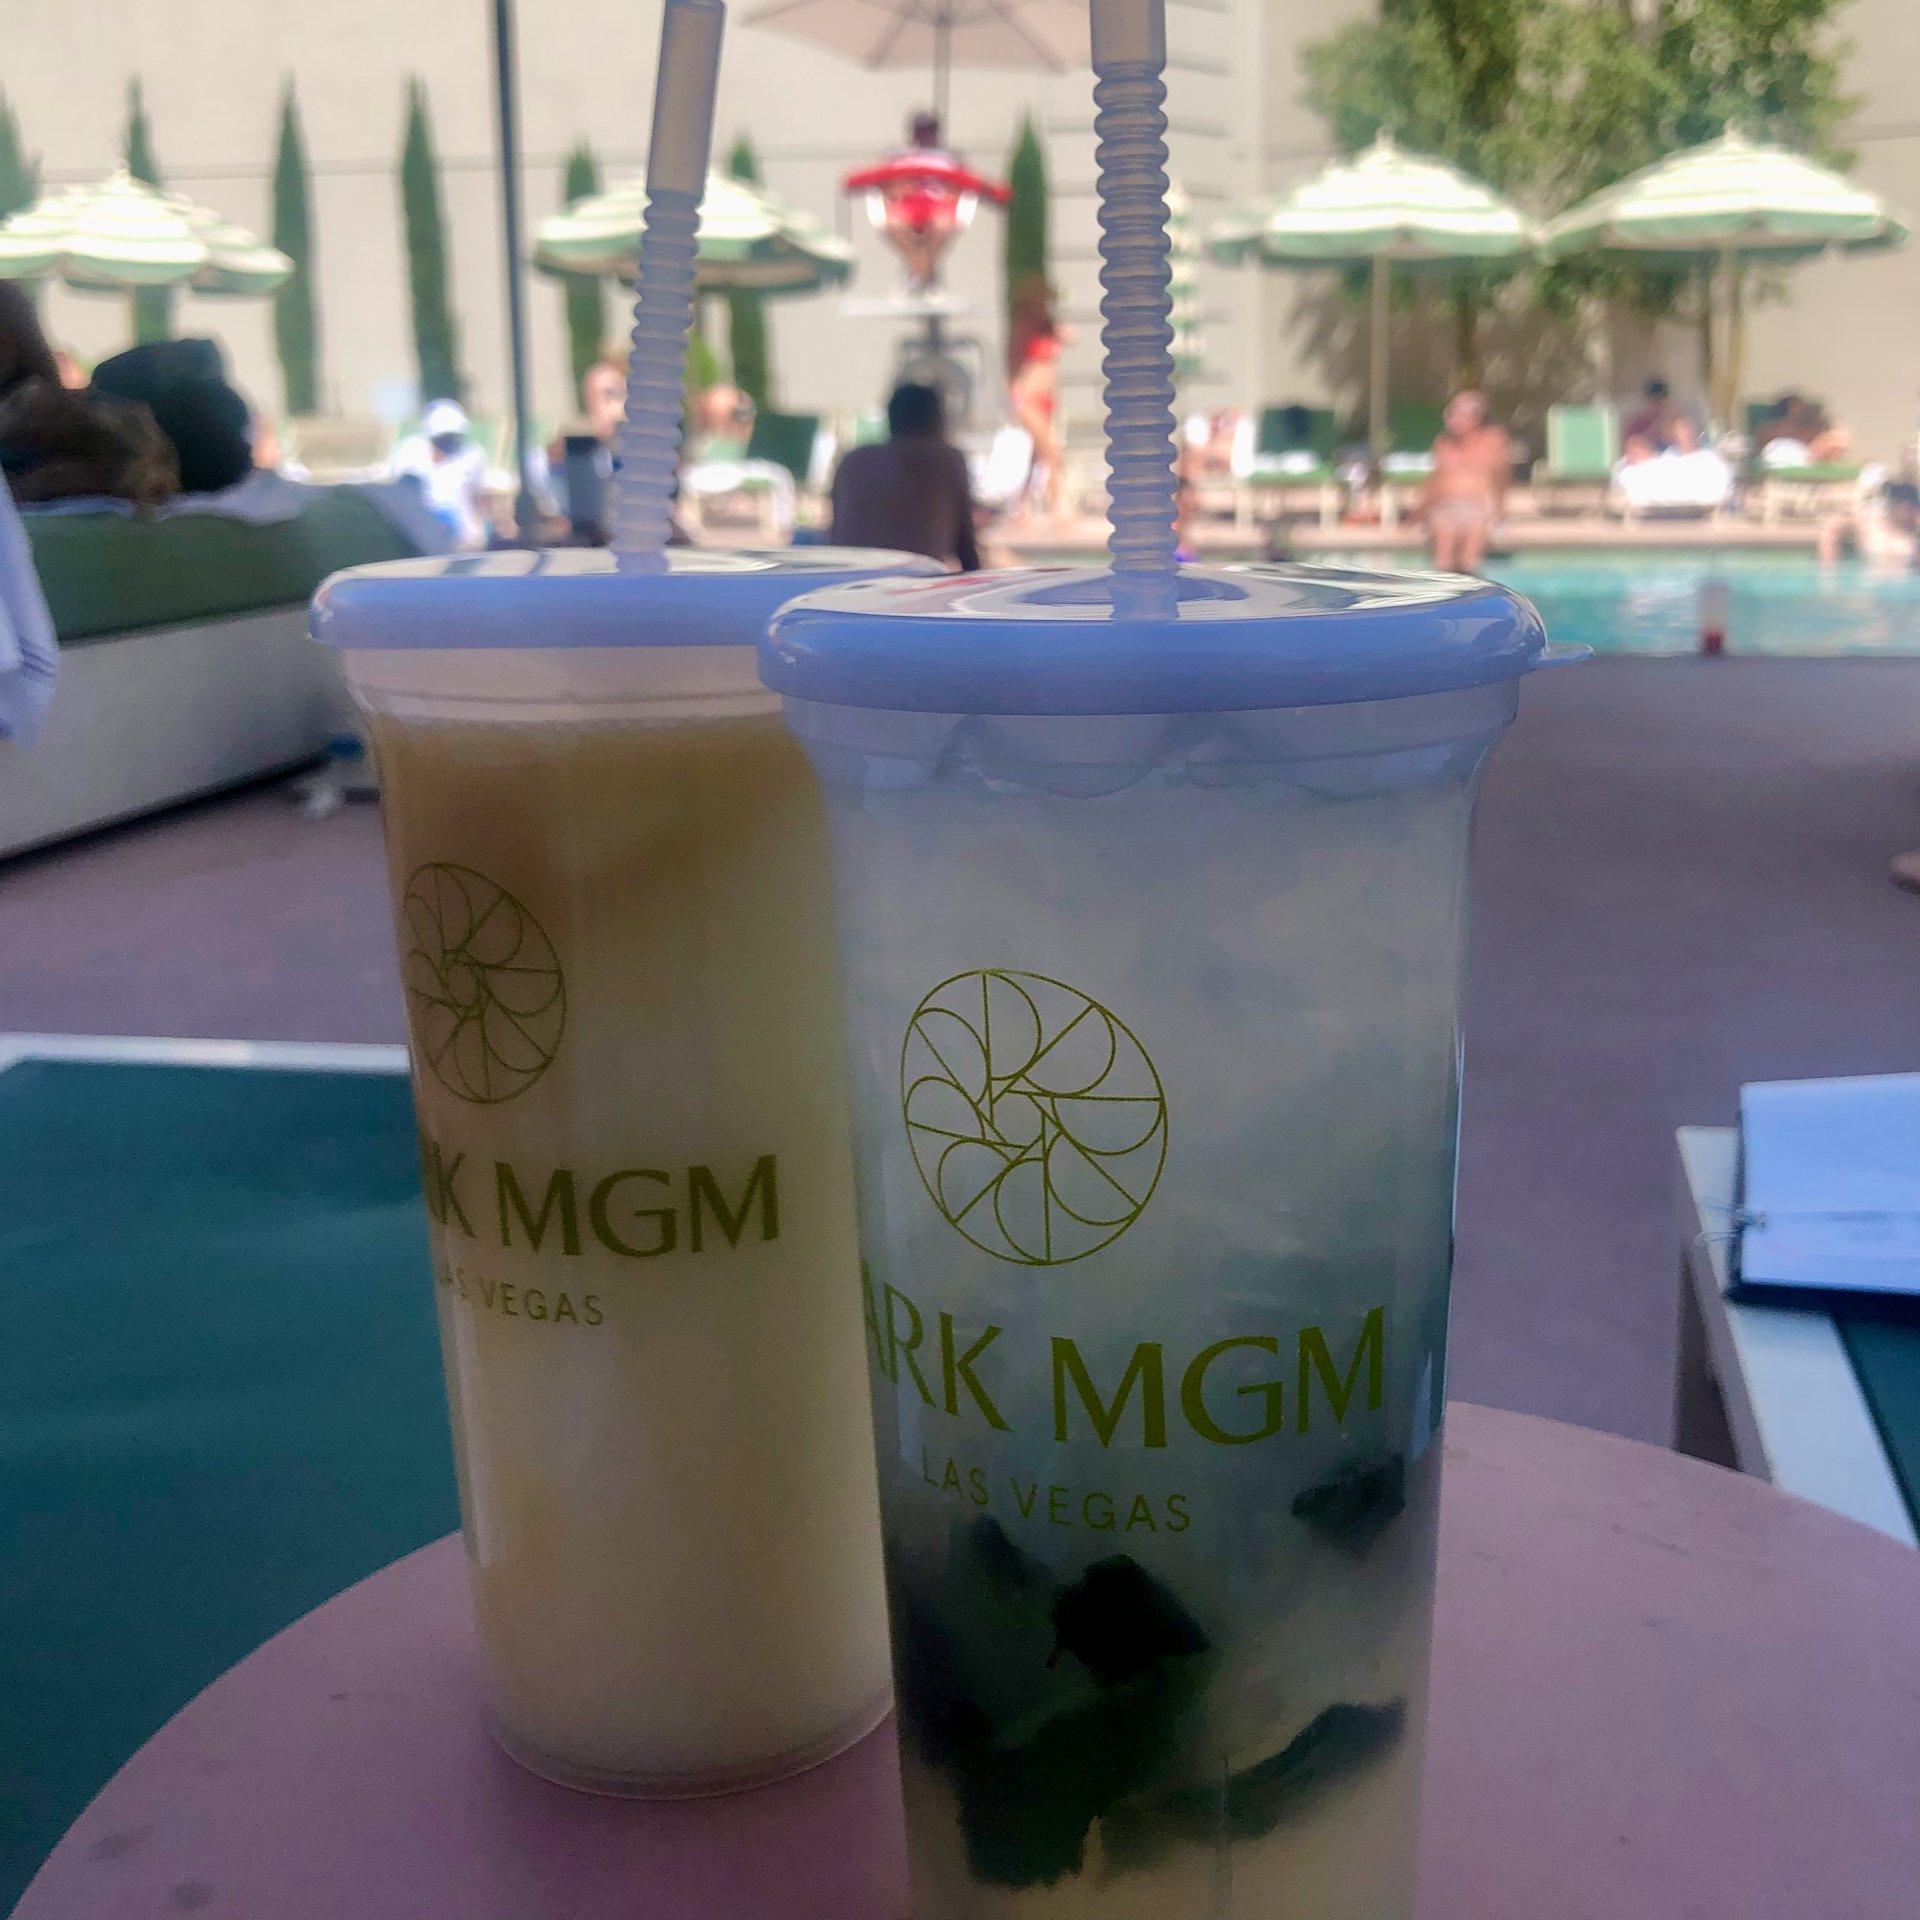  While it was not really advisable, we had to have some of the supersized drinks while lounging by the pool.  